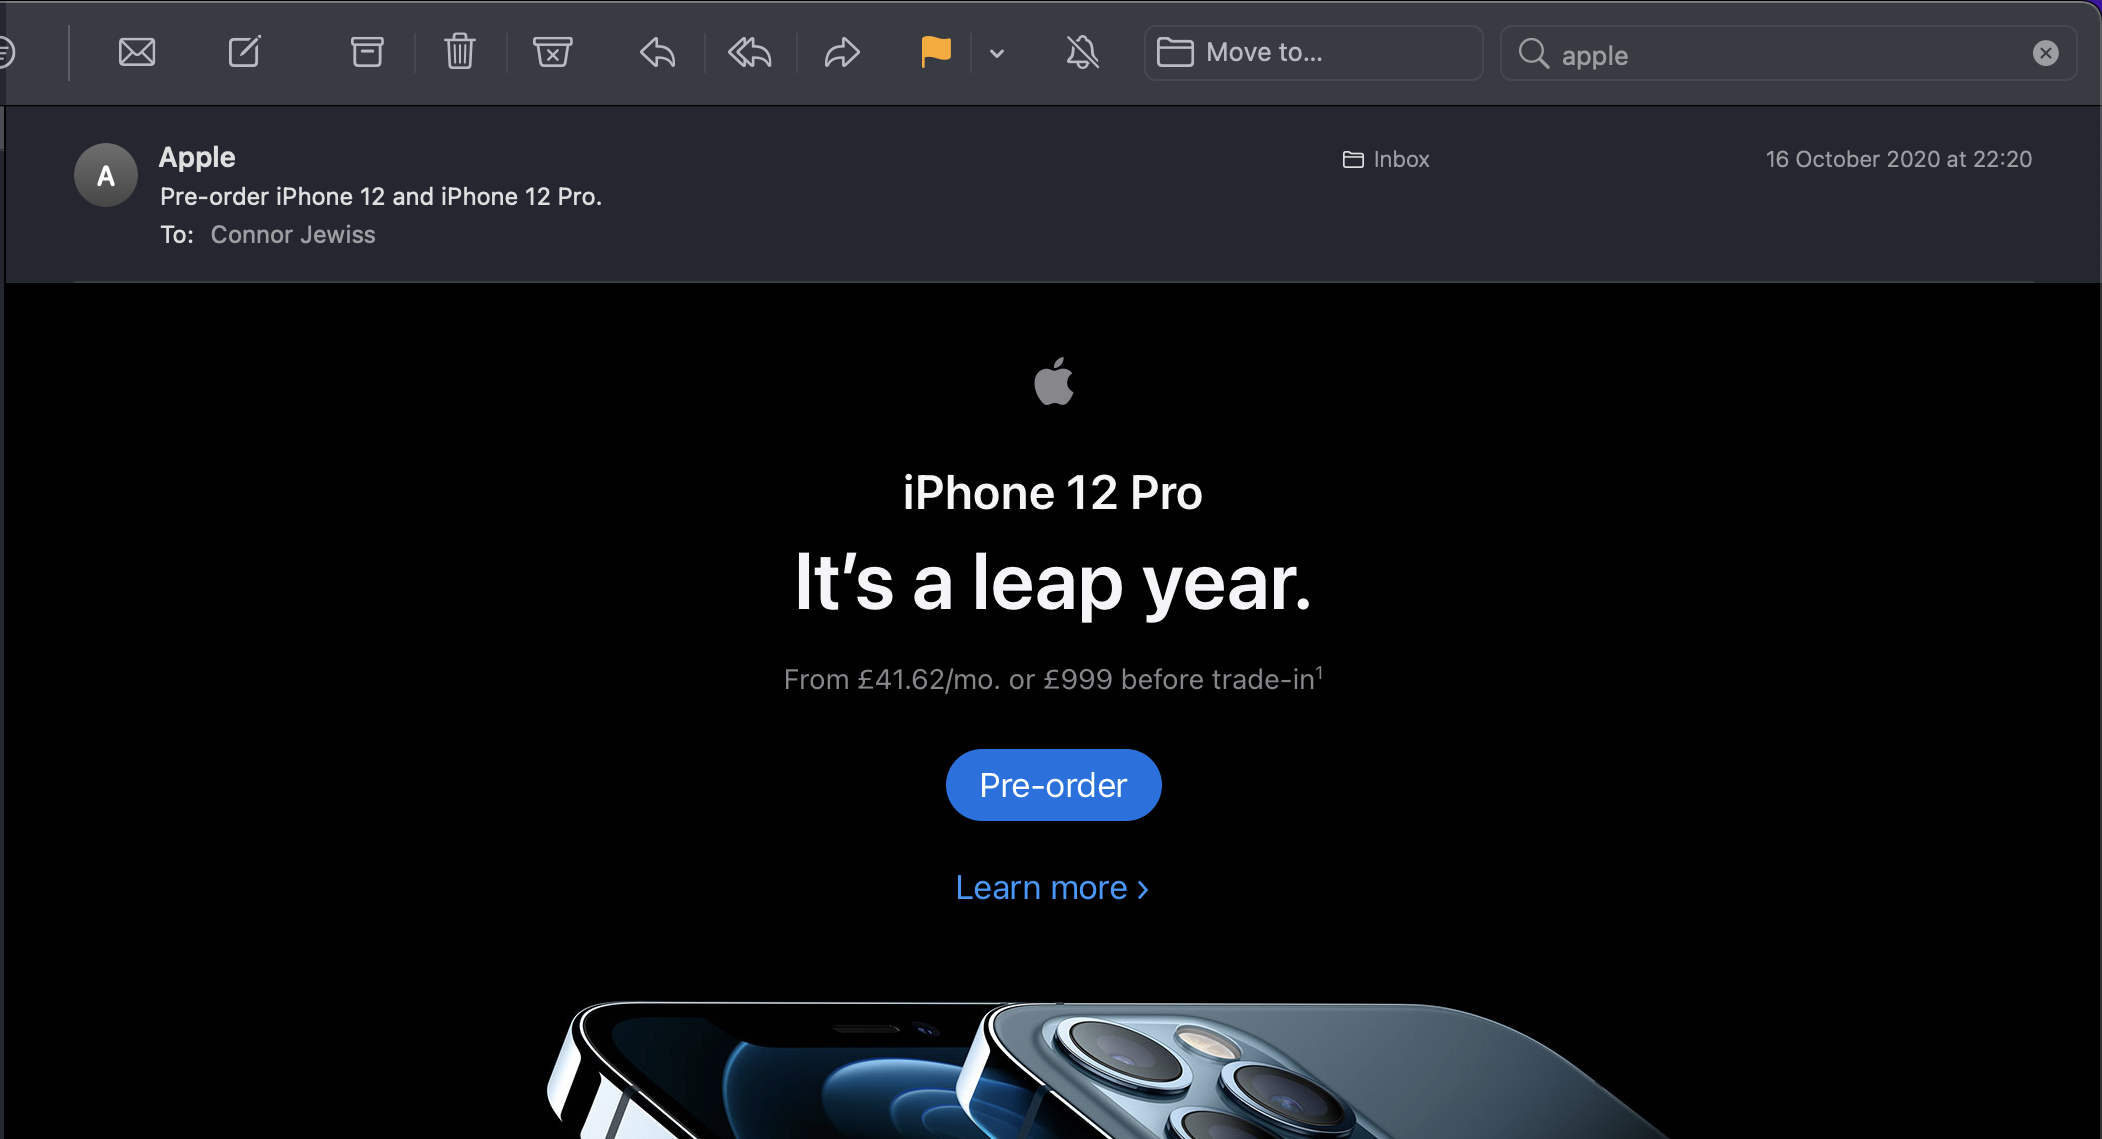 A screenshot of an email from Apple after the 2020 iPhone event